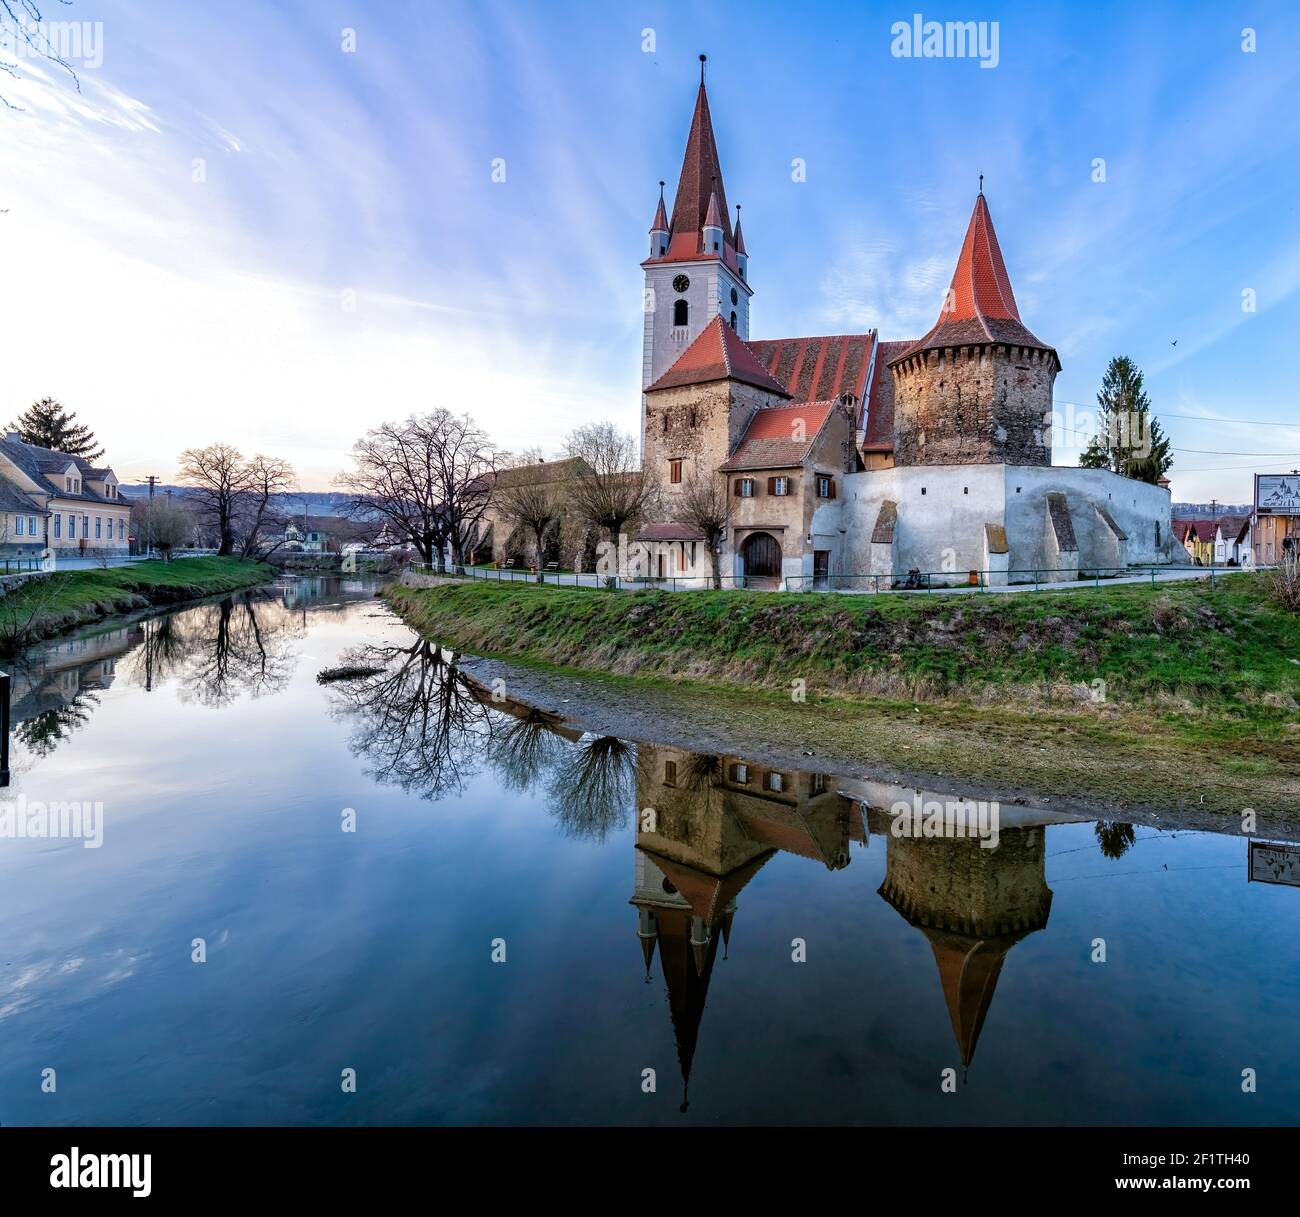 Fortified church of Cristian from Sibiu Hermannstadt. Transylvania, Romania, Medieval Church reflection in water. Medieval Architecture Stock Photo